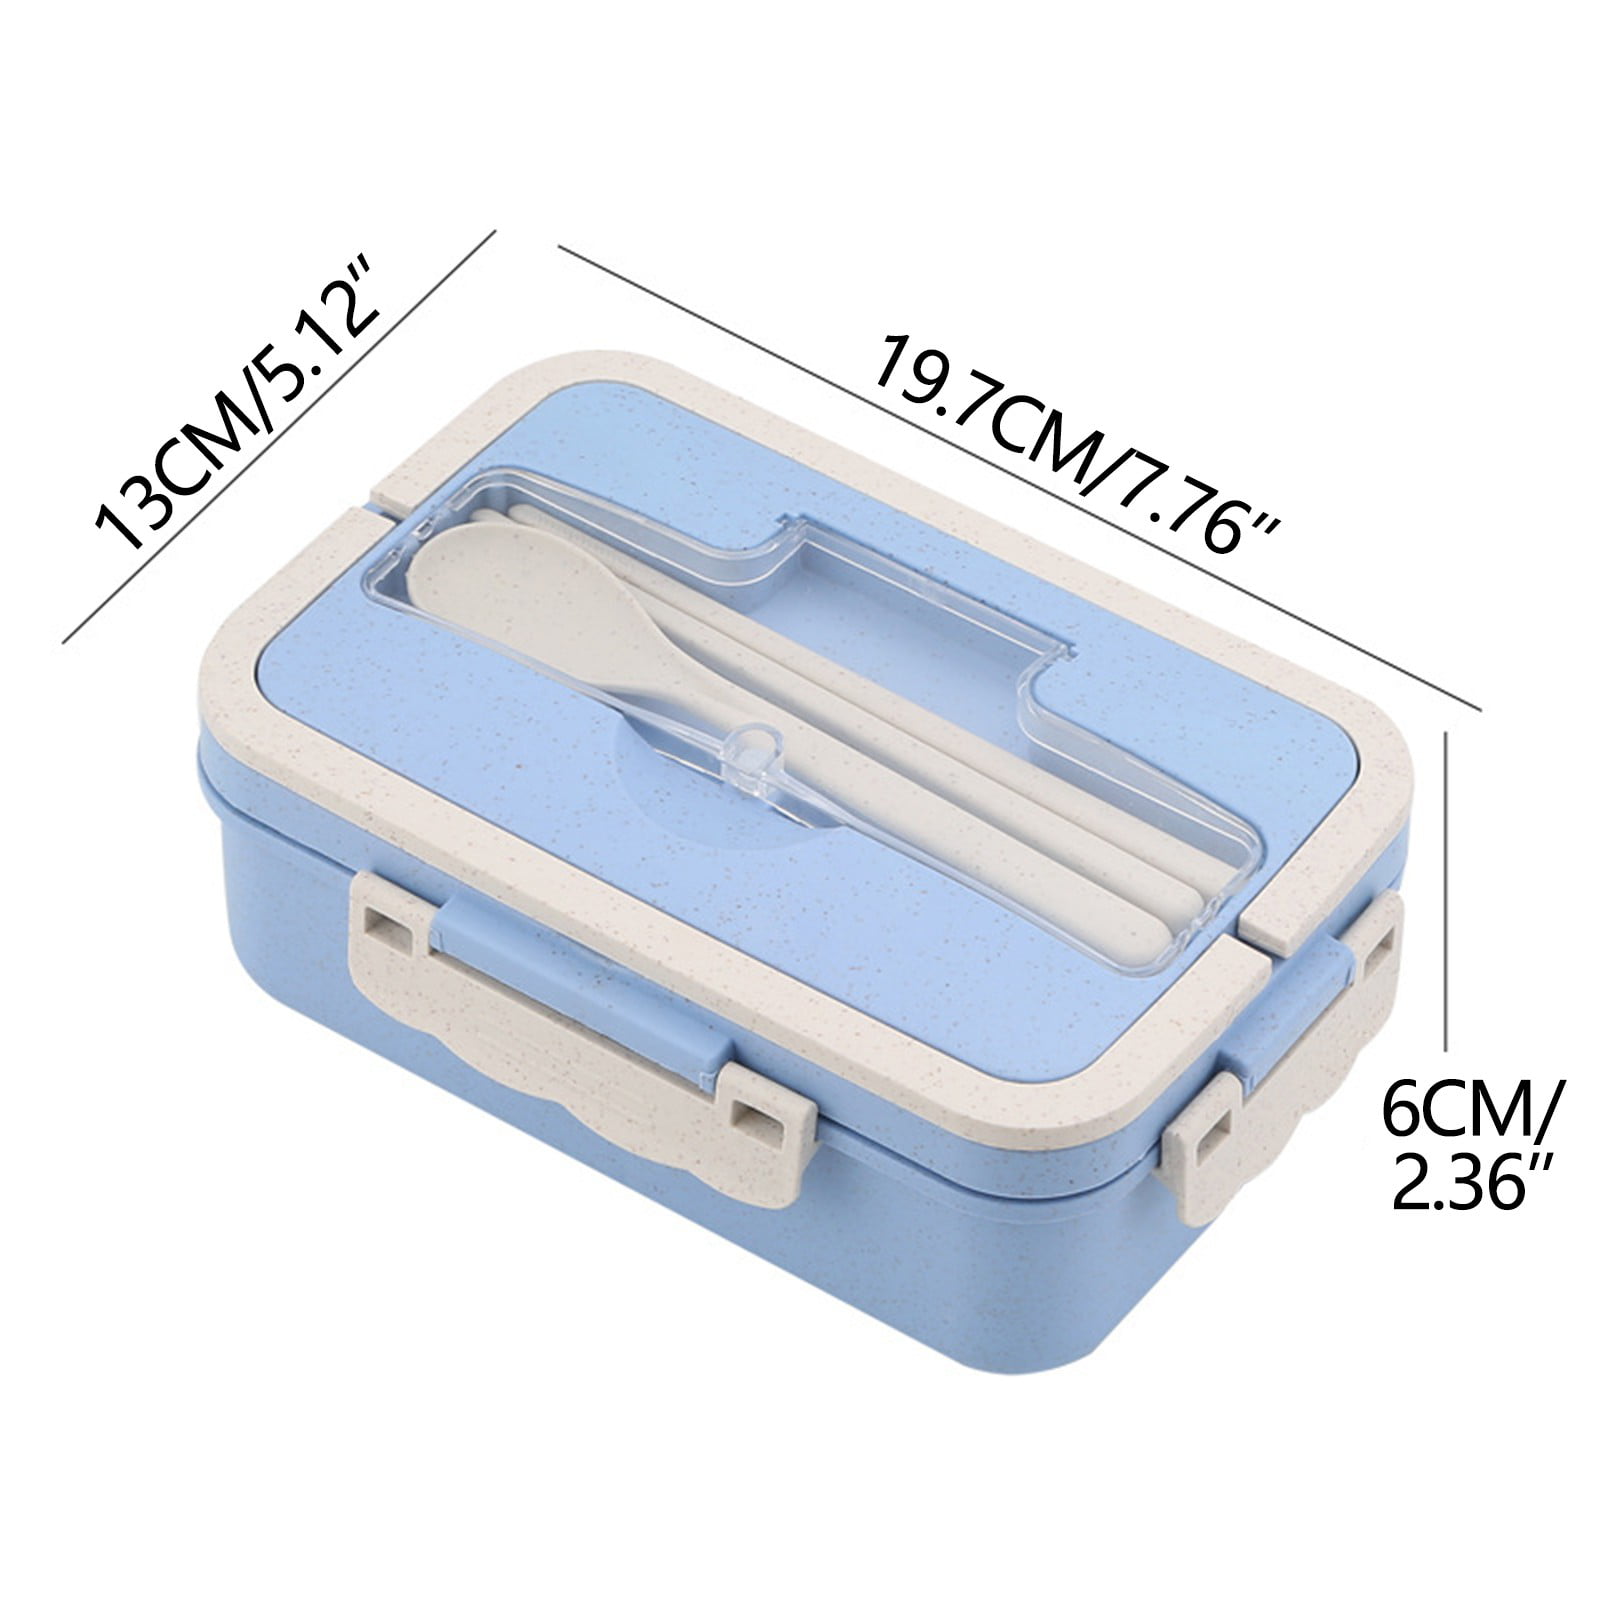 Bento Lunch Box For Adults, Kids | Leakproof Meal Prep Portion Control  Boxes Japanese Style for Boys…See more Bento Lunch Box For Adults, Kids 